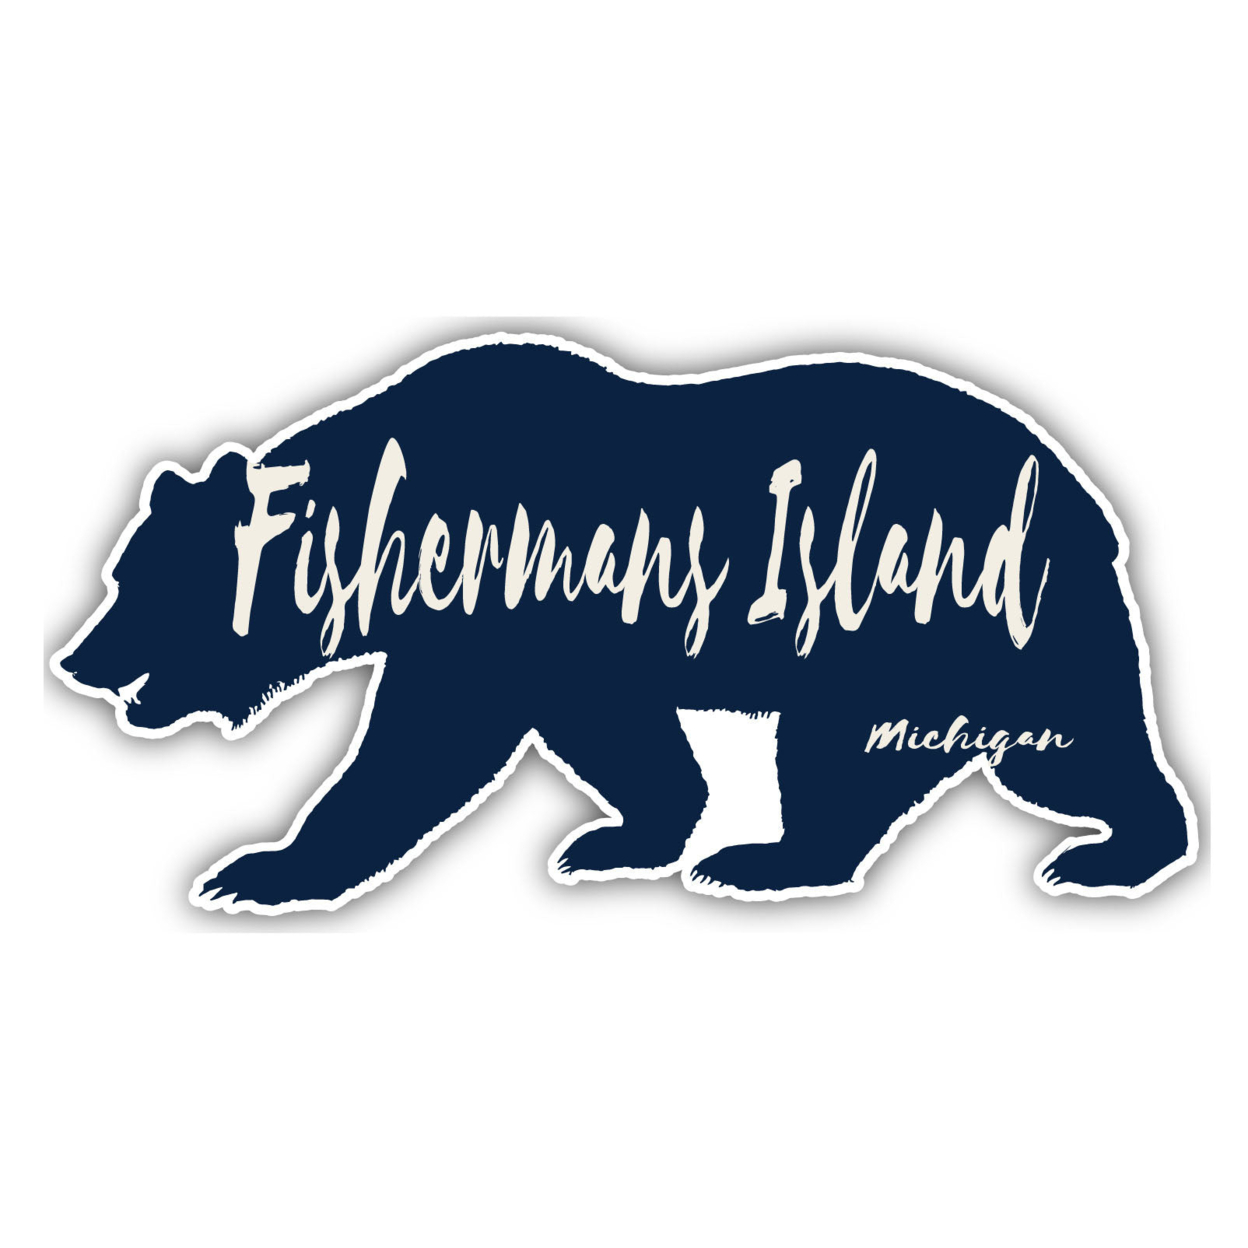 Fishermans Island Michigan Souvenir Decorative Stickers (Choose Theme And Size) - 4-Pack, 10-Inch, Bear